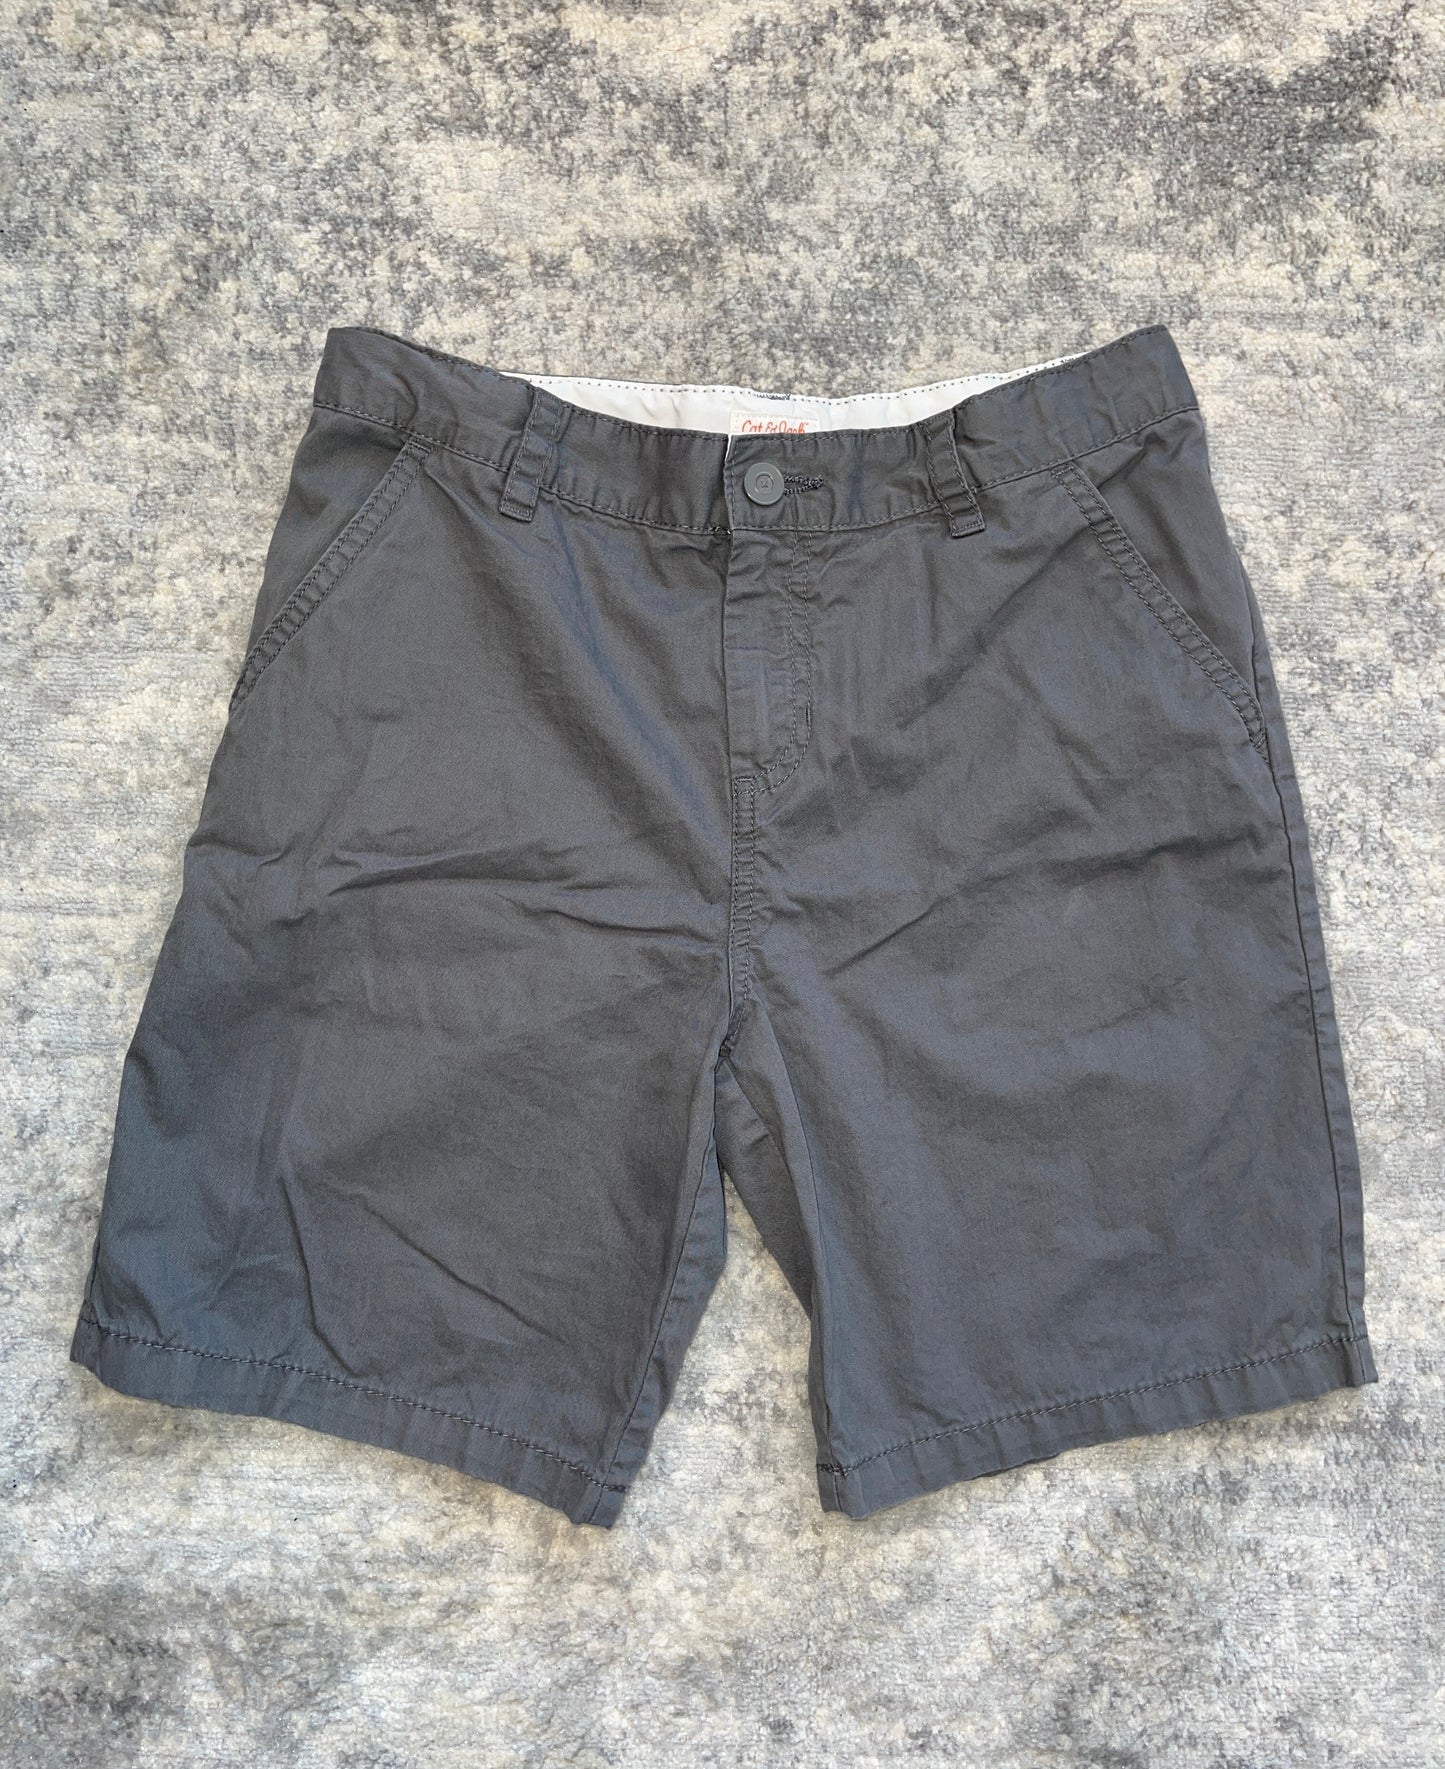 Cat and Jack Boys Gray Shorts Size XL (14)- PPU Montgomery